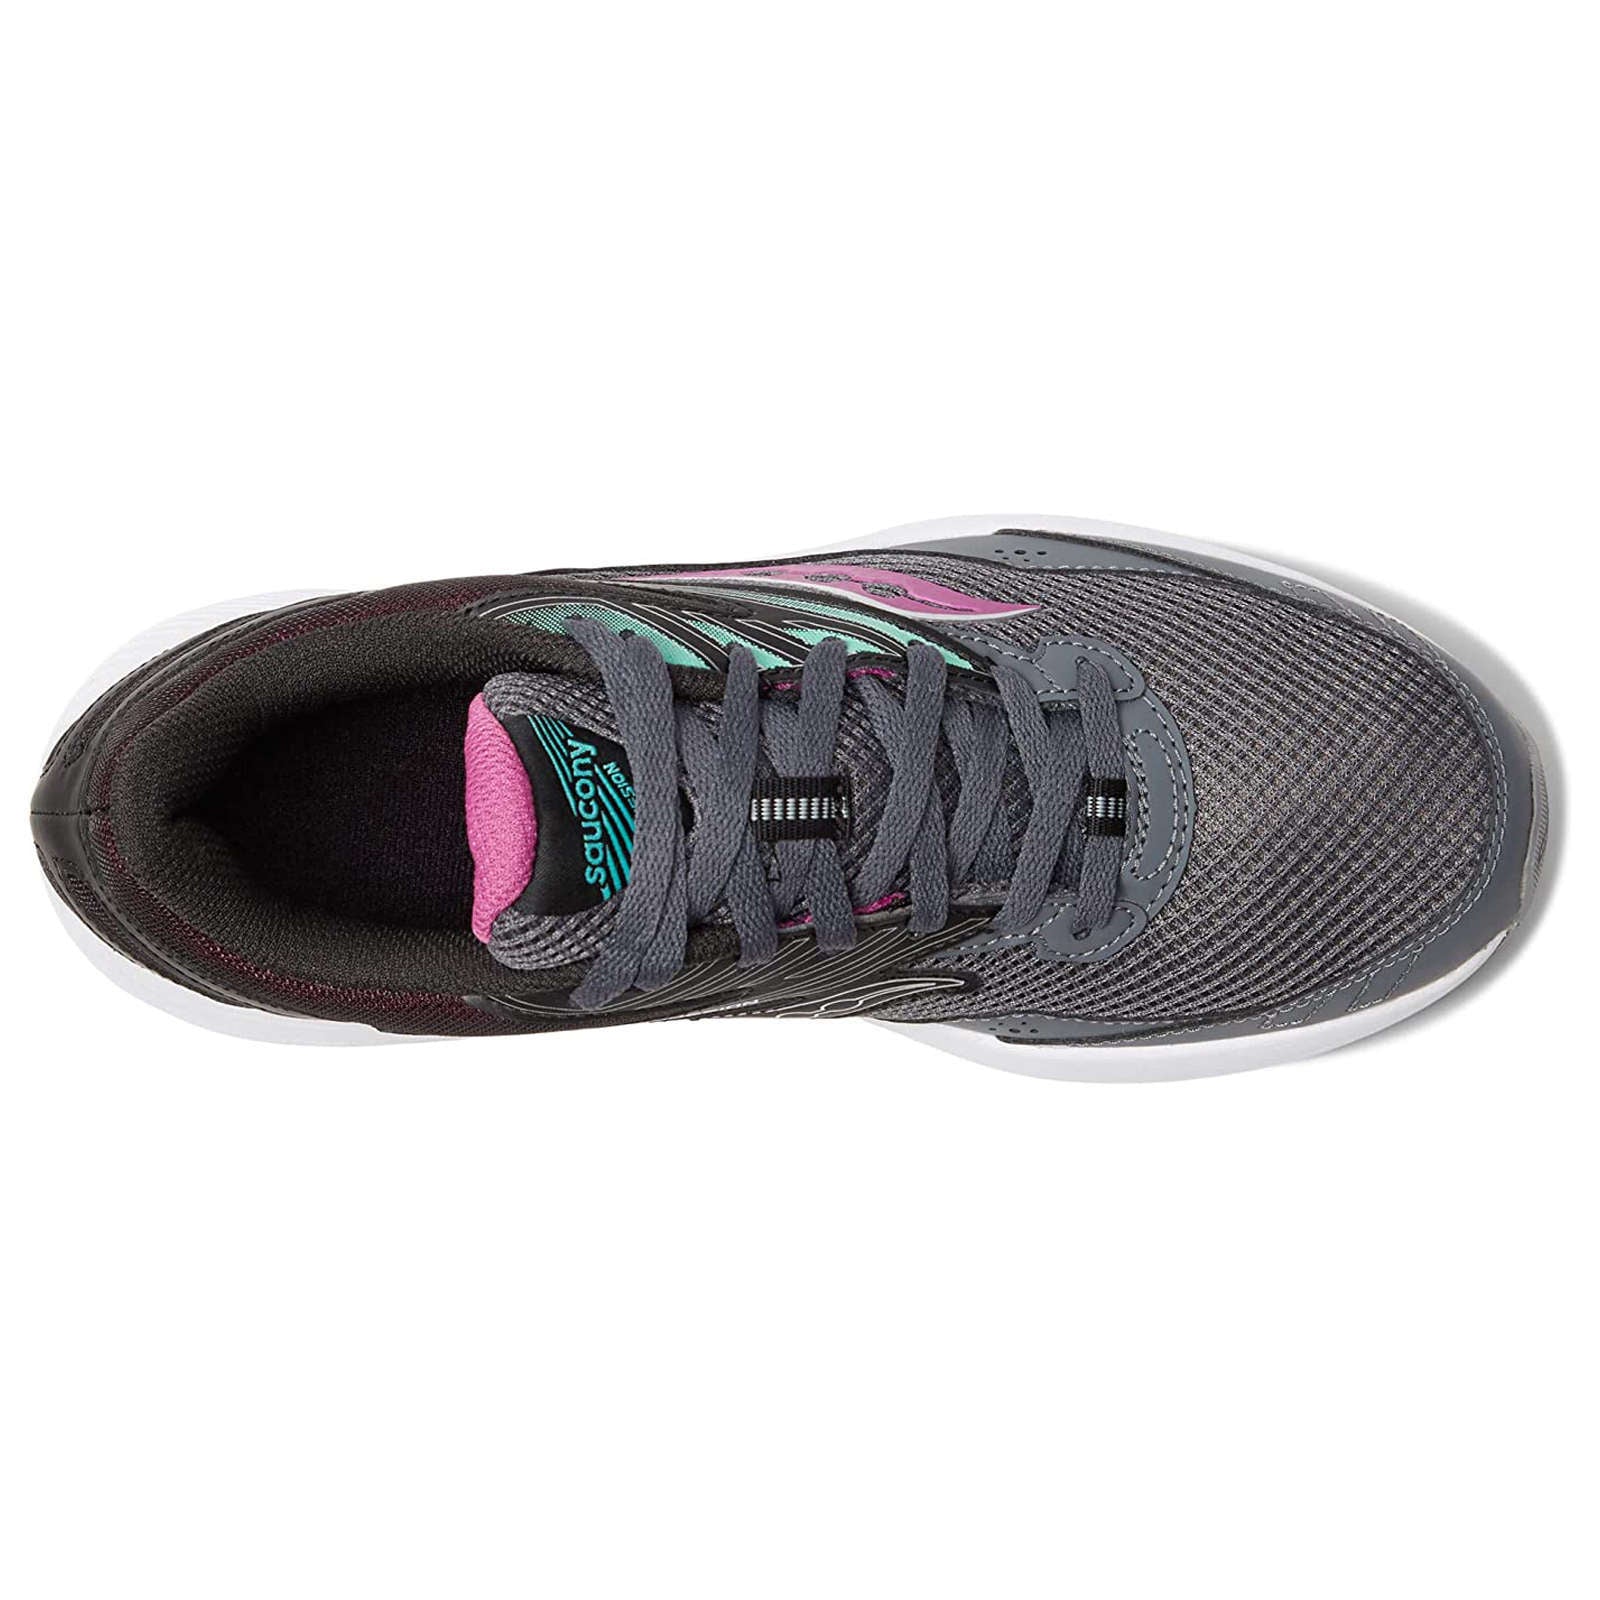 Saucony Cohesion 15 Synthetic Textile Women's Low-Top Trainers#color_shadow razzle